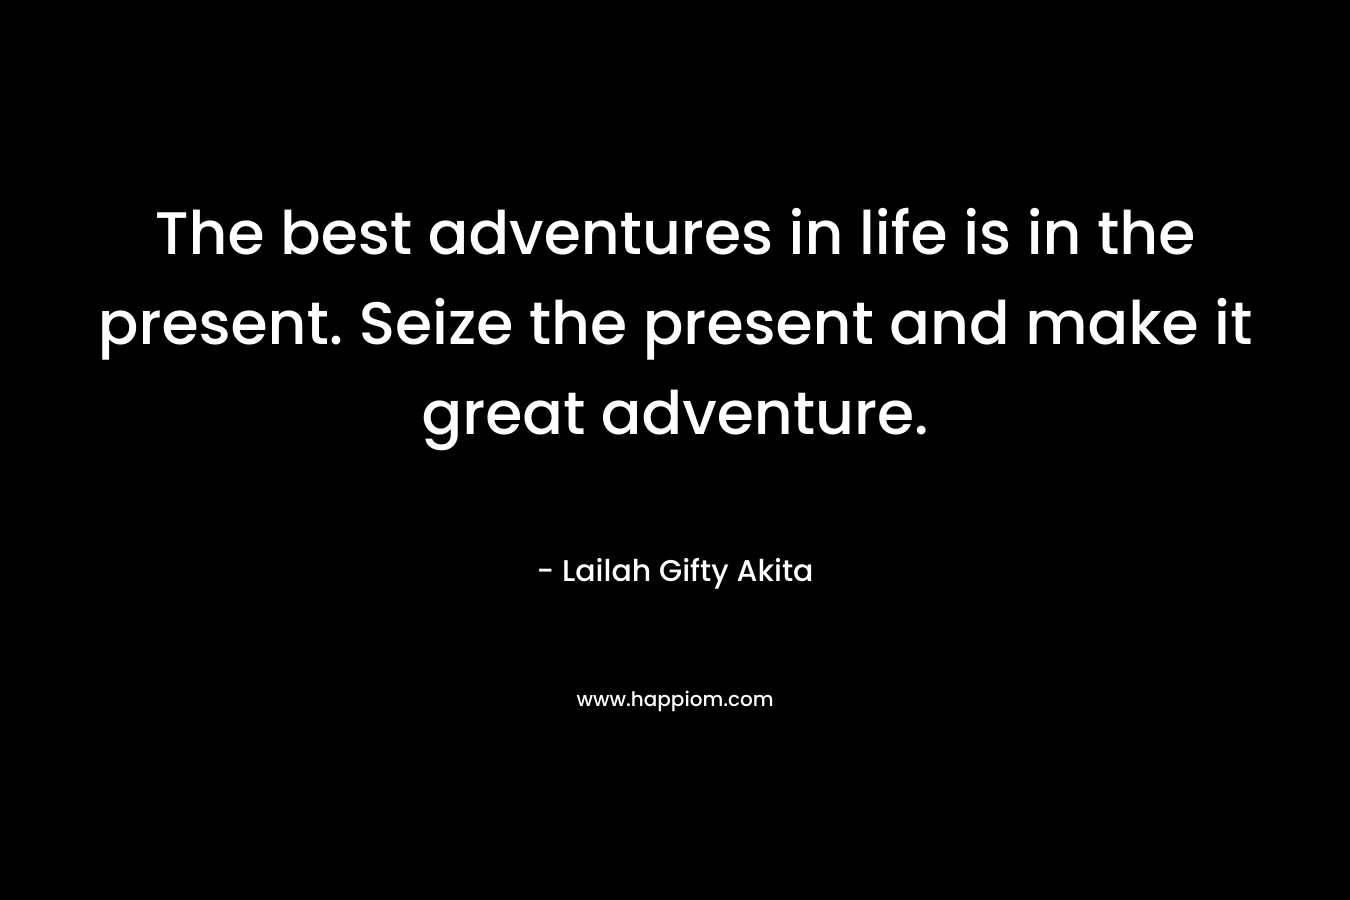 The best adventures in life is in the present. Seize the present and make it great adventure.